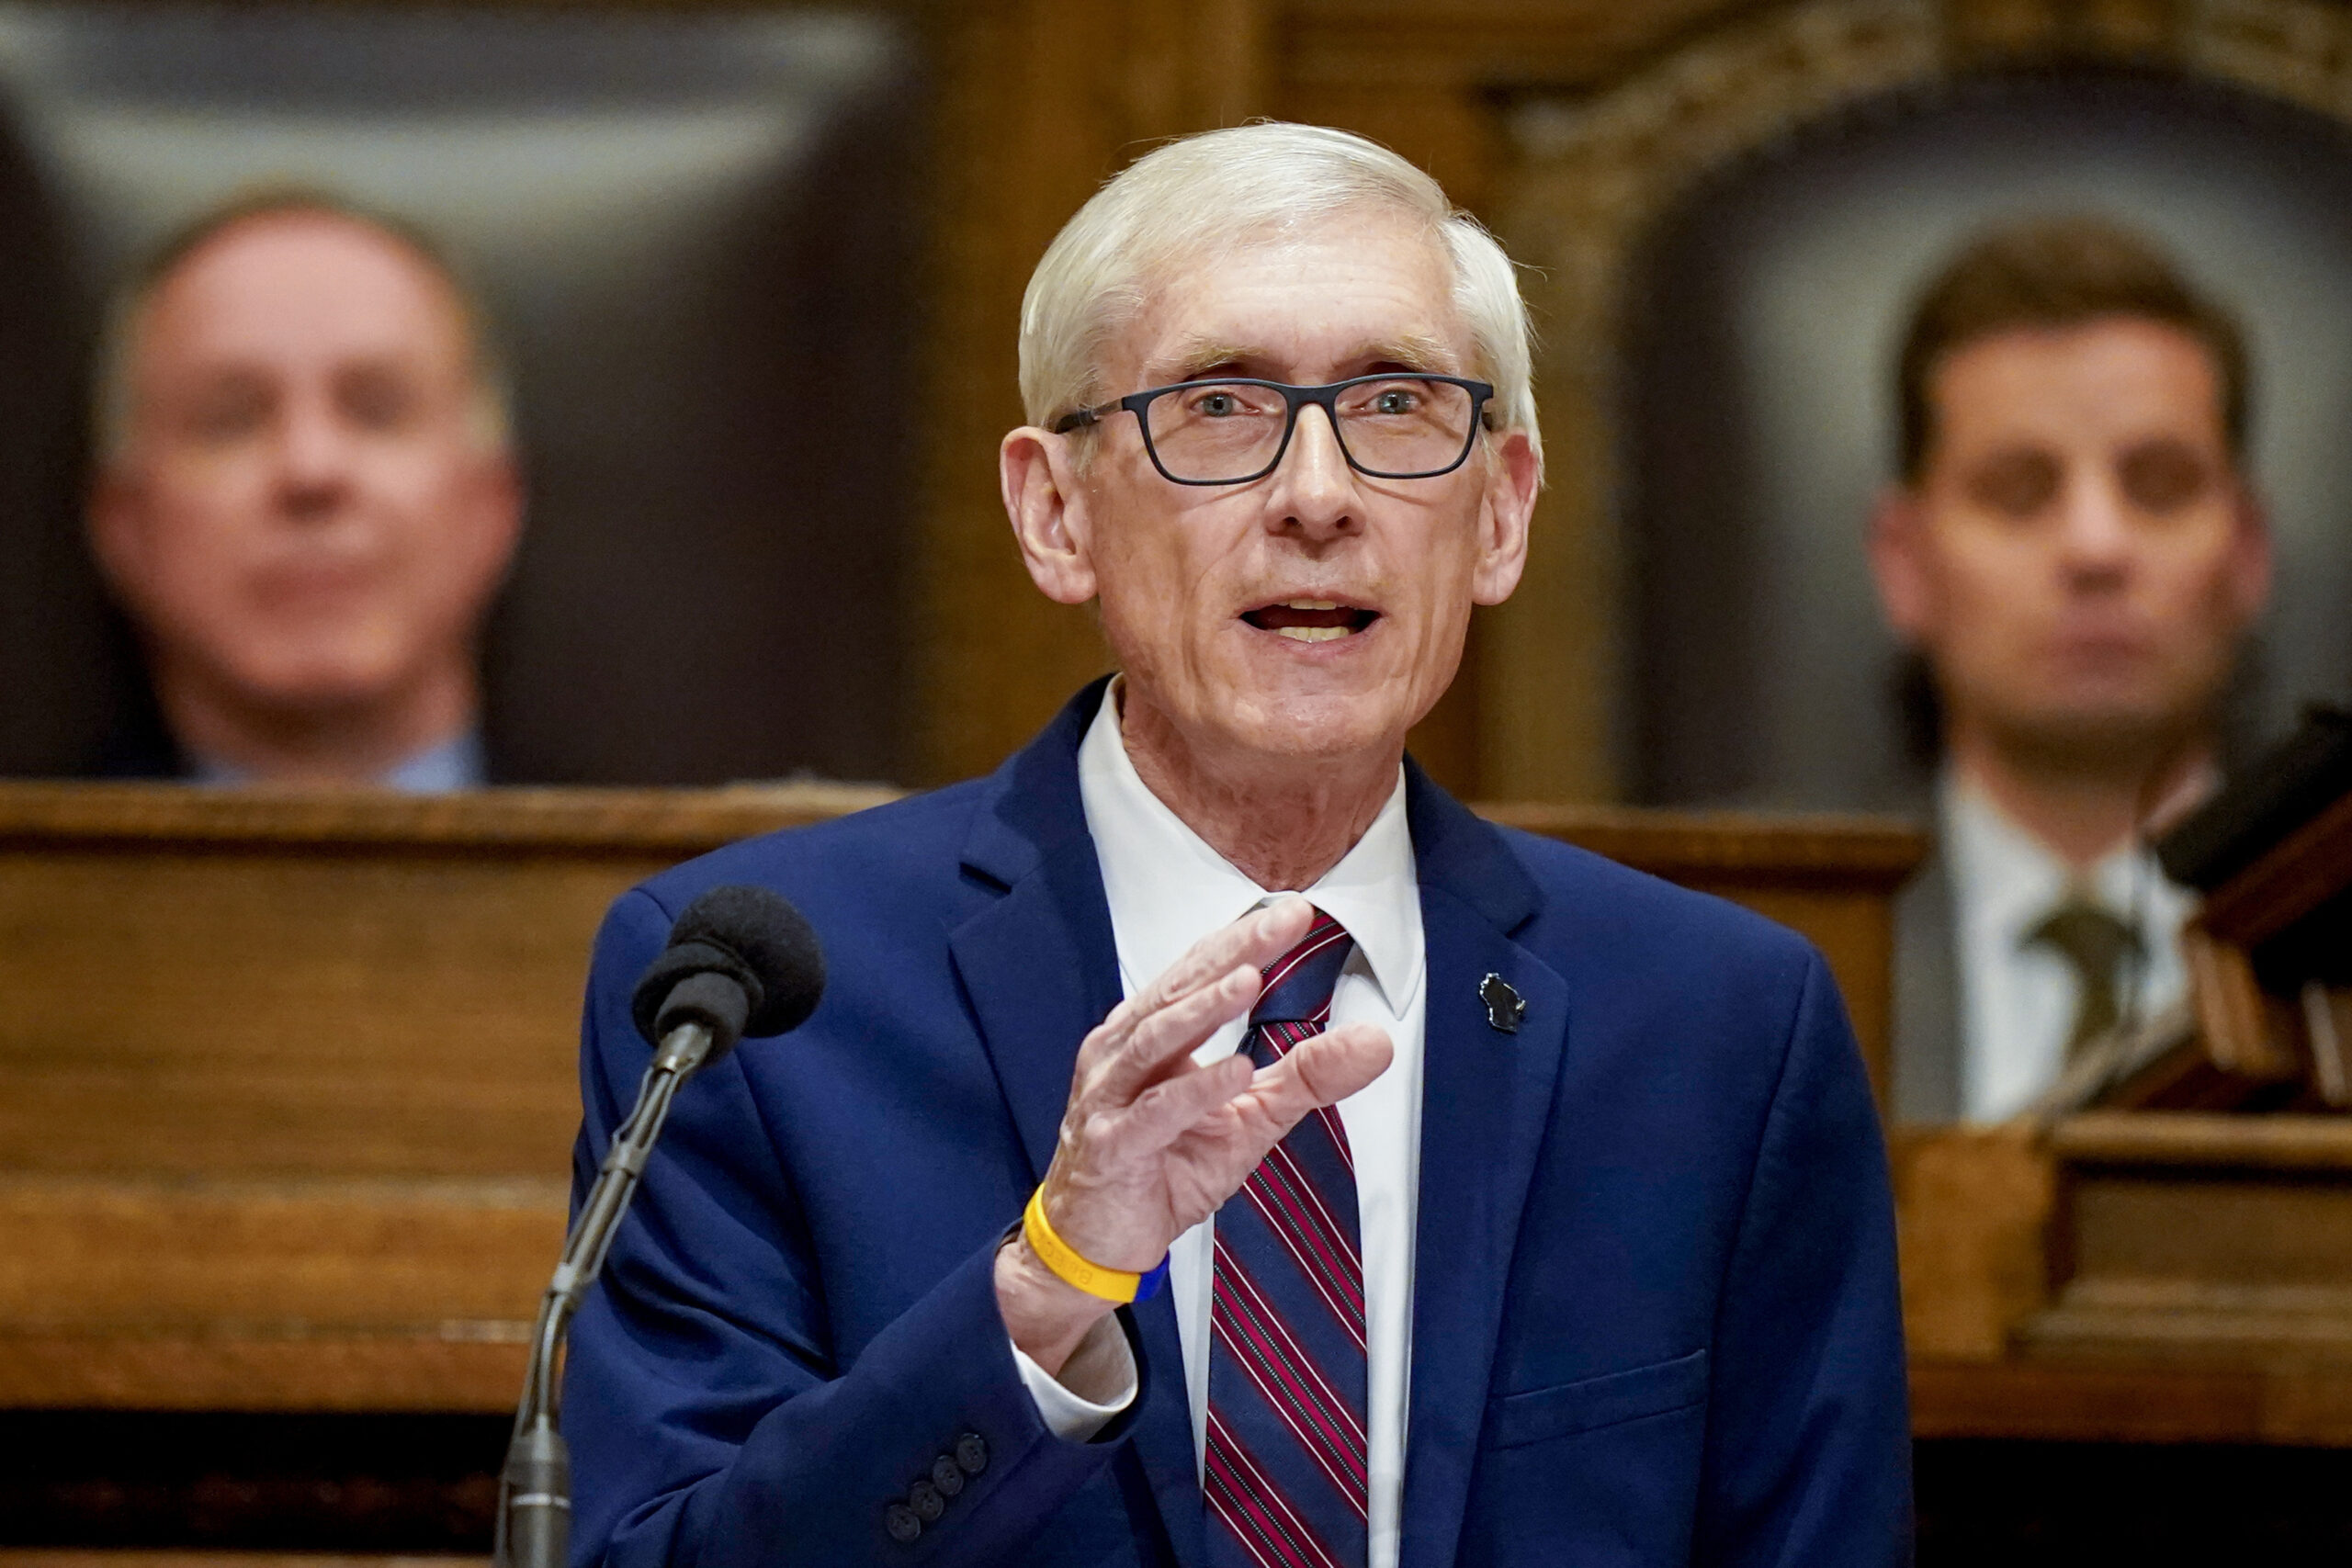 Wisconsin Republicans pass parental rights bill but face uphill battle with Democratic governor